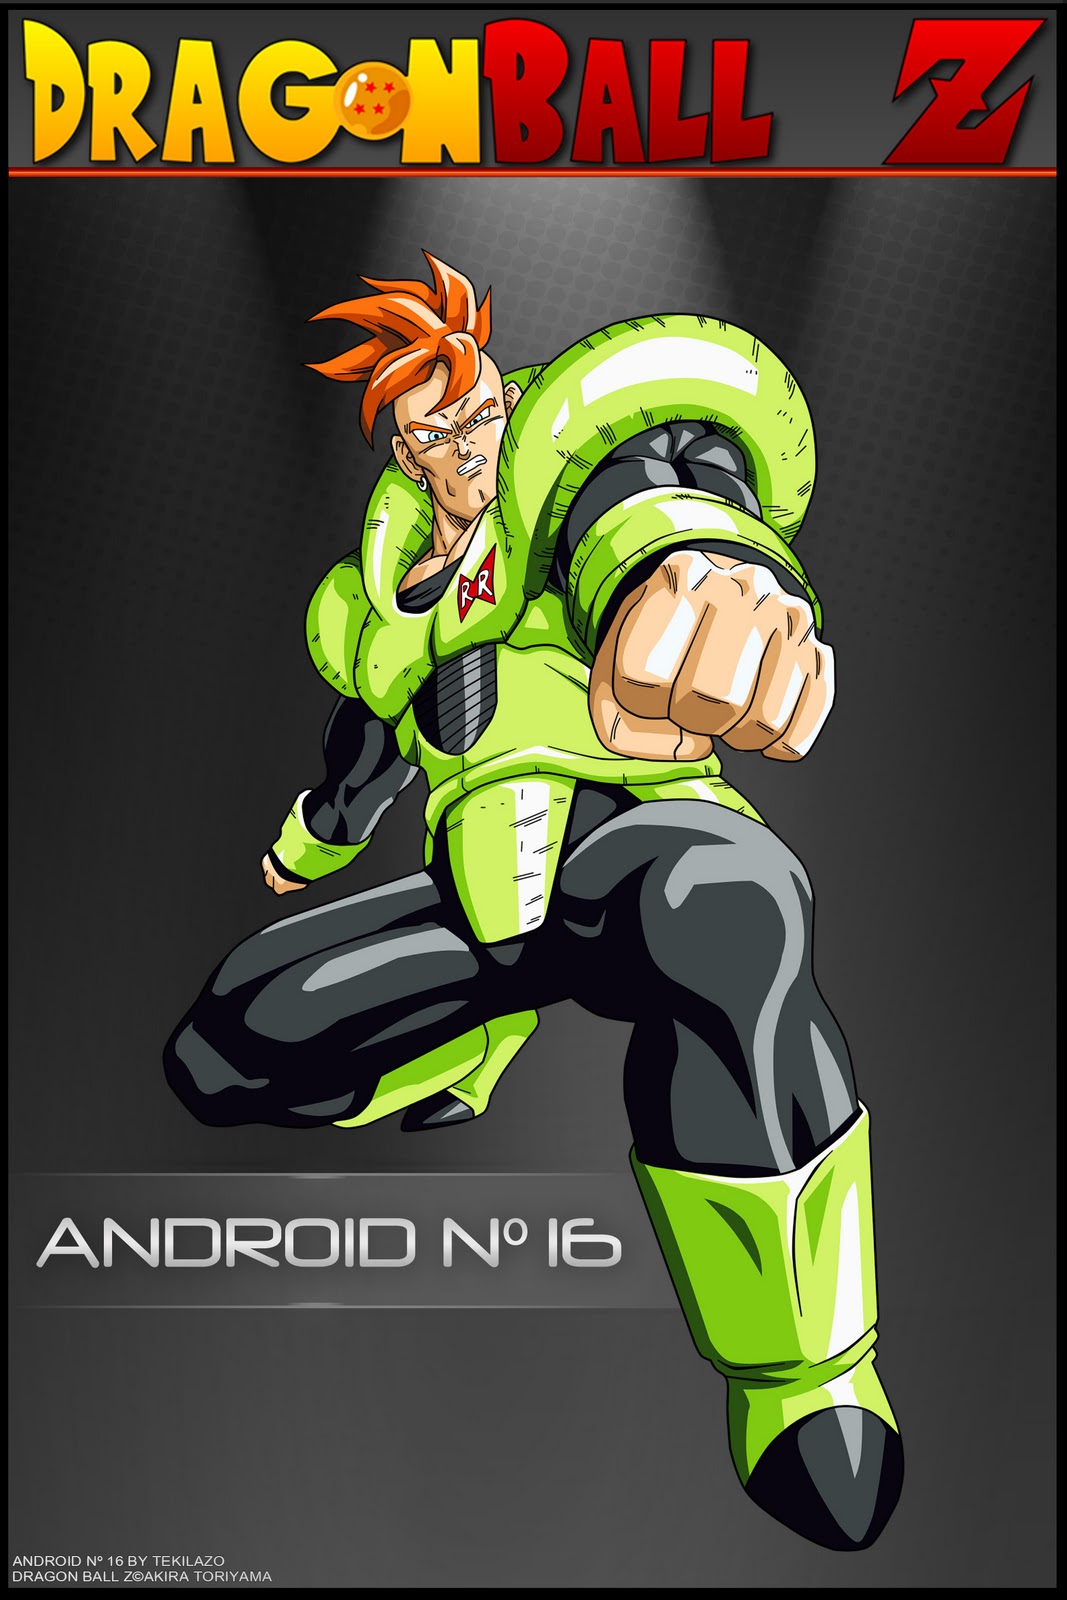 Dragon Ball Z: Android